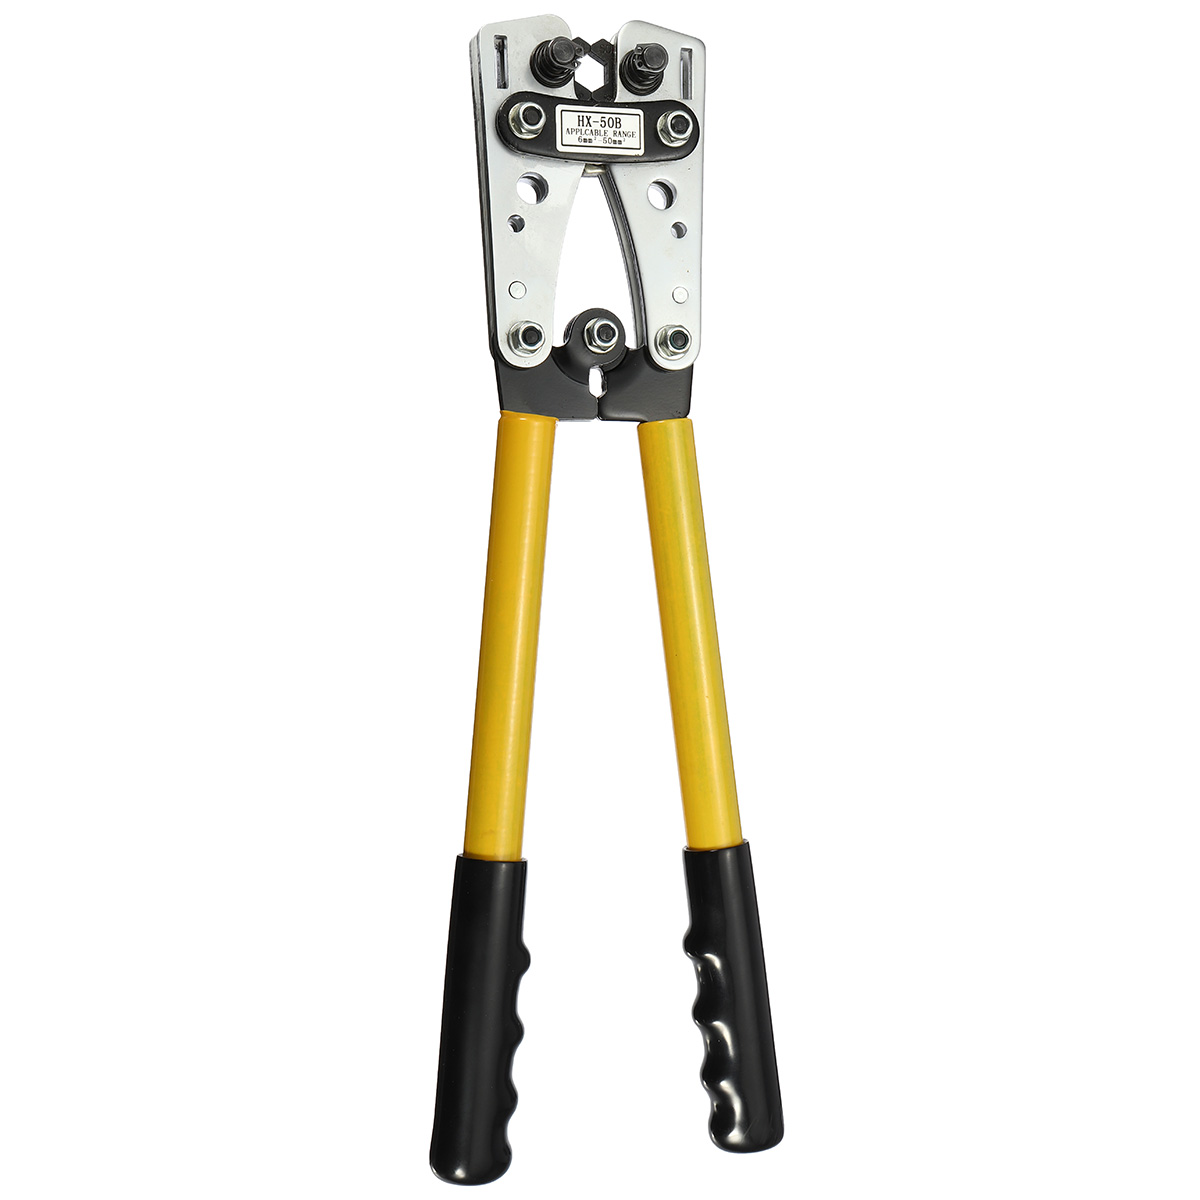 6-50-mm-Crimp-Tube-Terminal-Crimper-Plier-Tool-Battery-Cable-Lugs-Hex-Crimping-Tool-Cable-Terminal-P-1549269-2